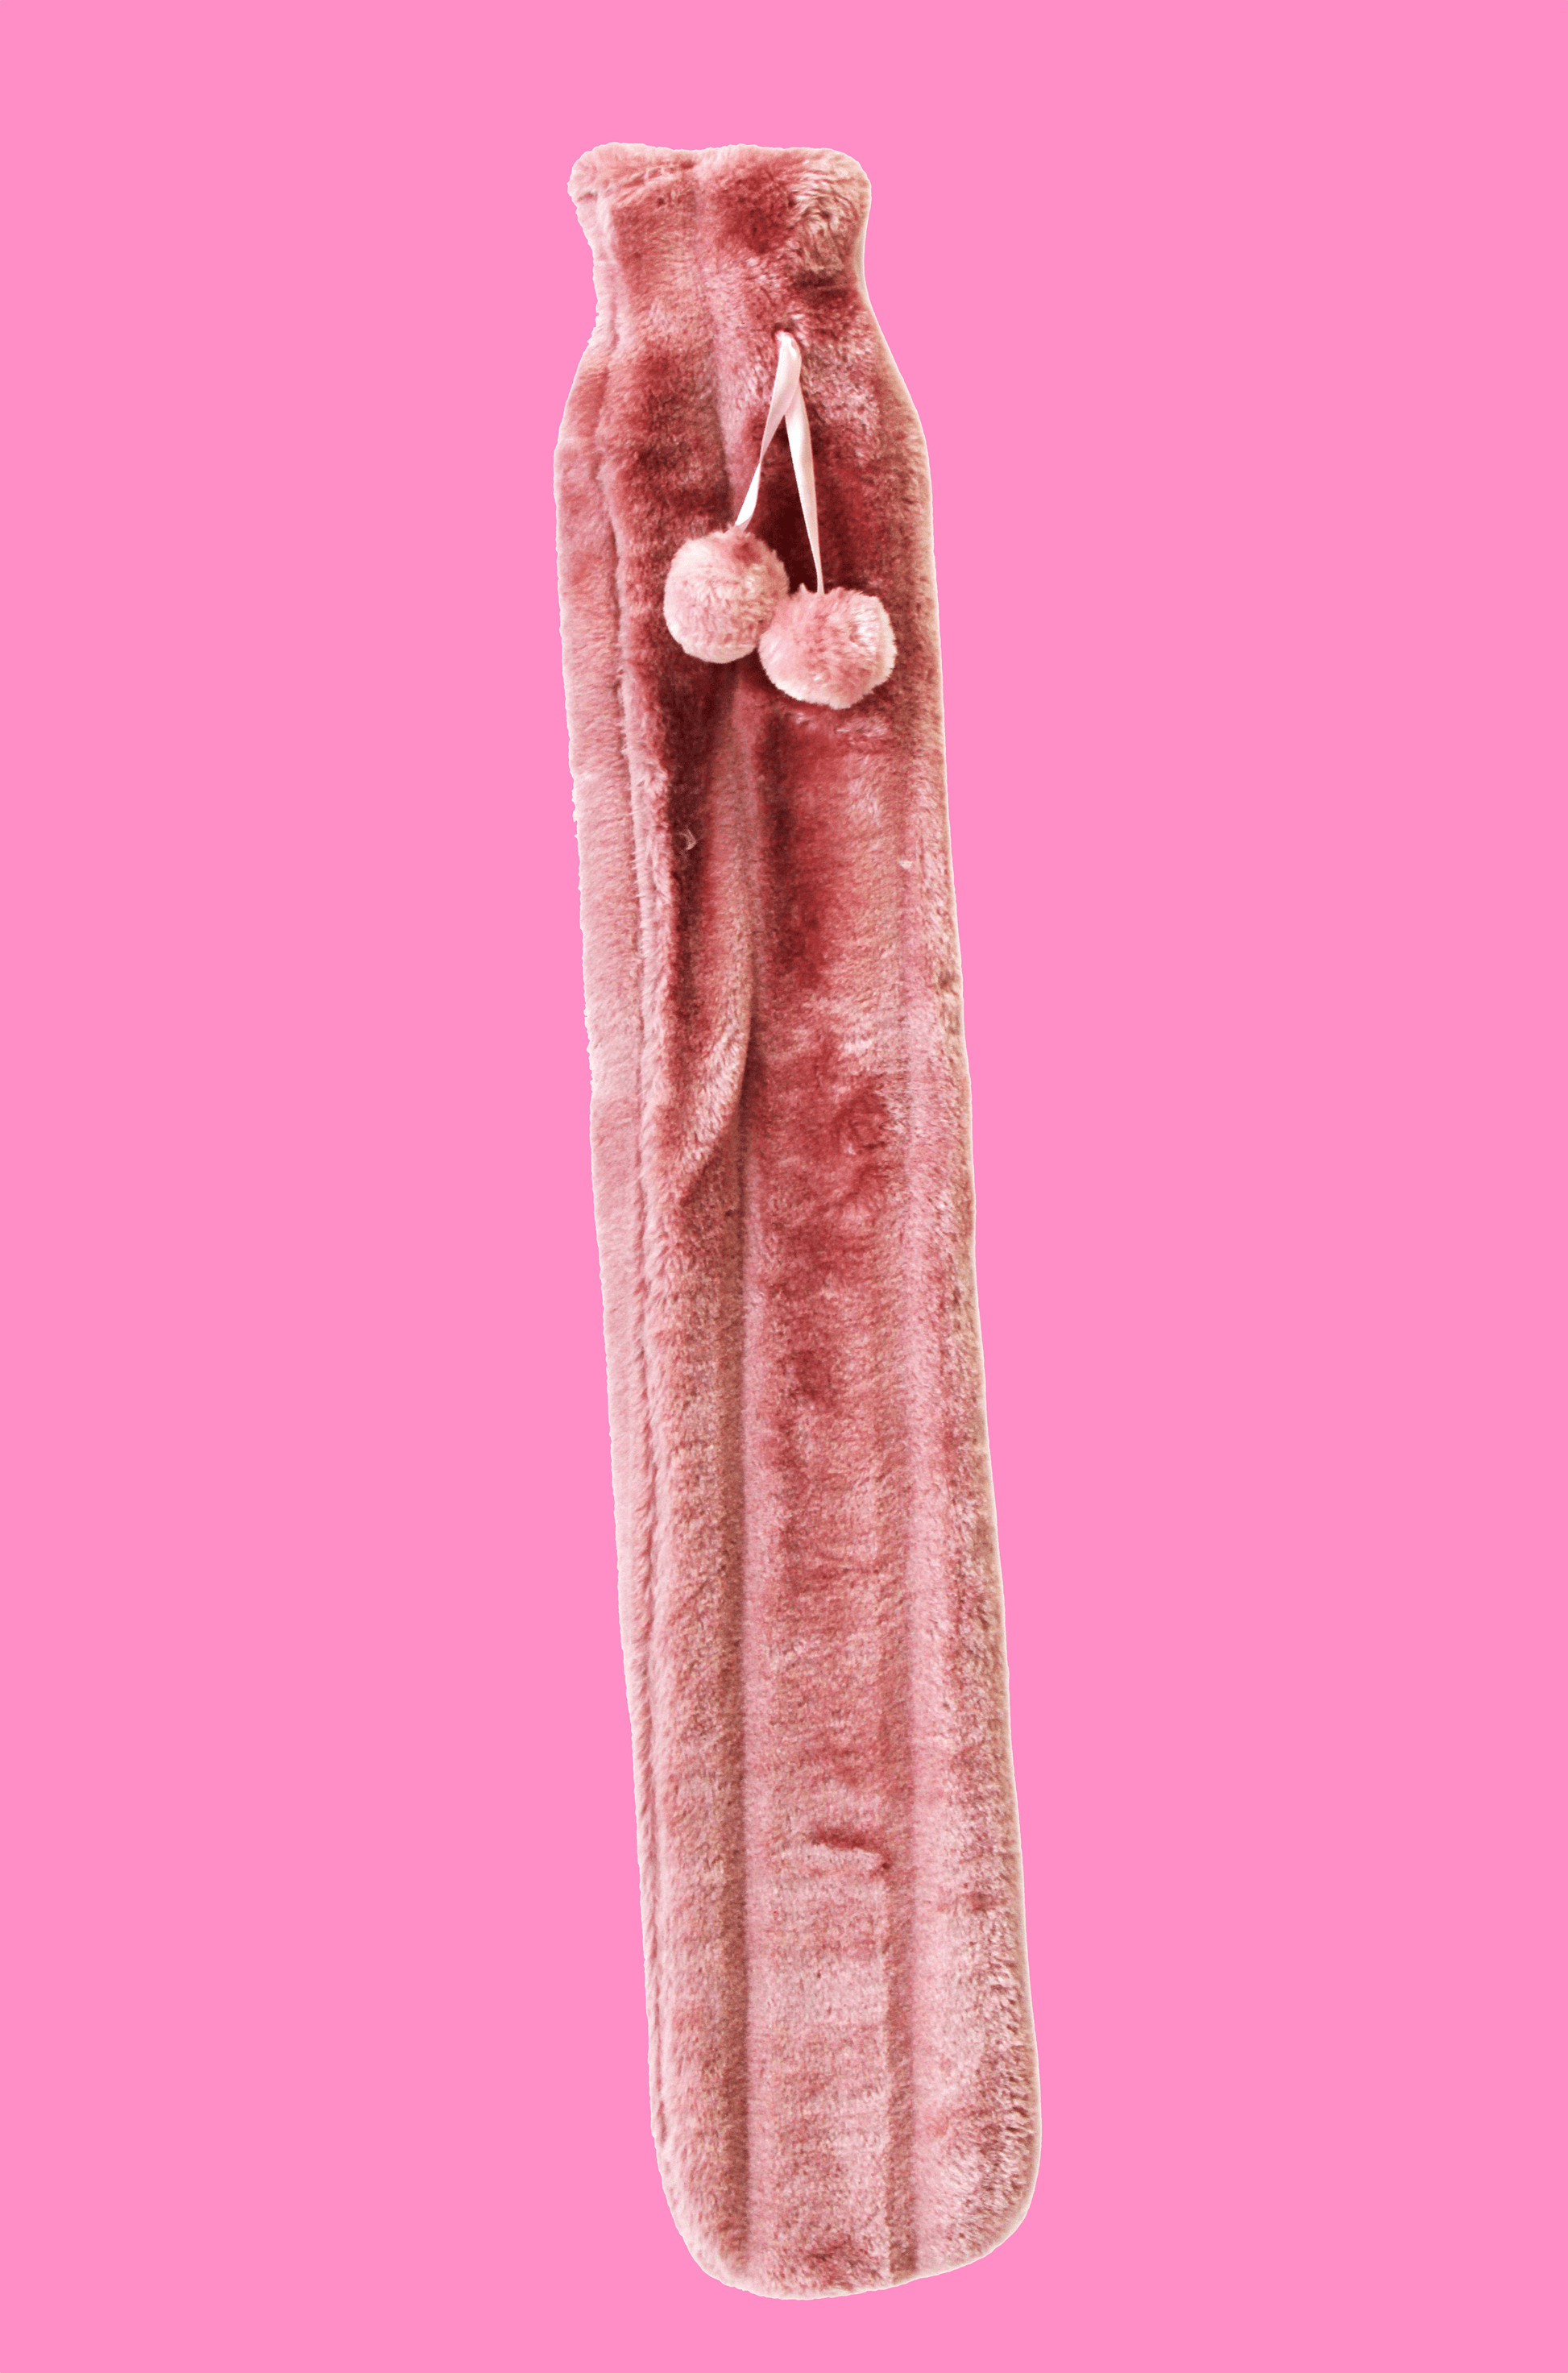 Faux Fur Pom Pom Extra Long Hot Water Bottle, 2L Capacity BLUSH PINK OLIVIA ROCCO Hot Water Bottle